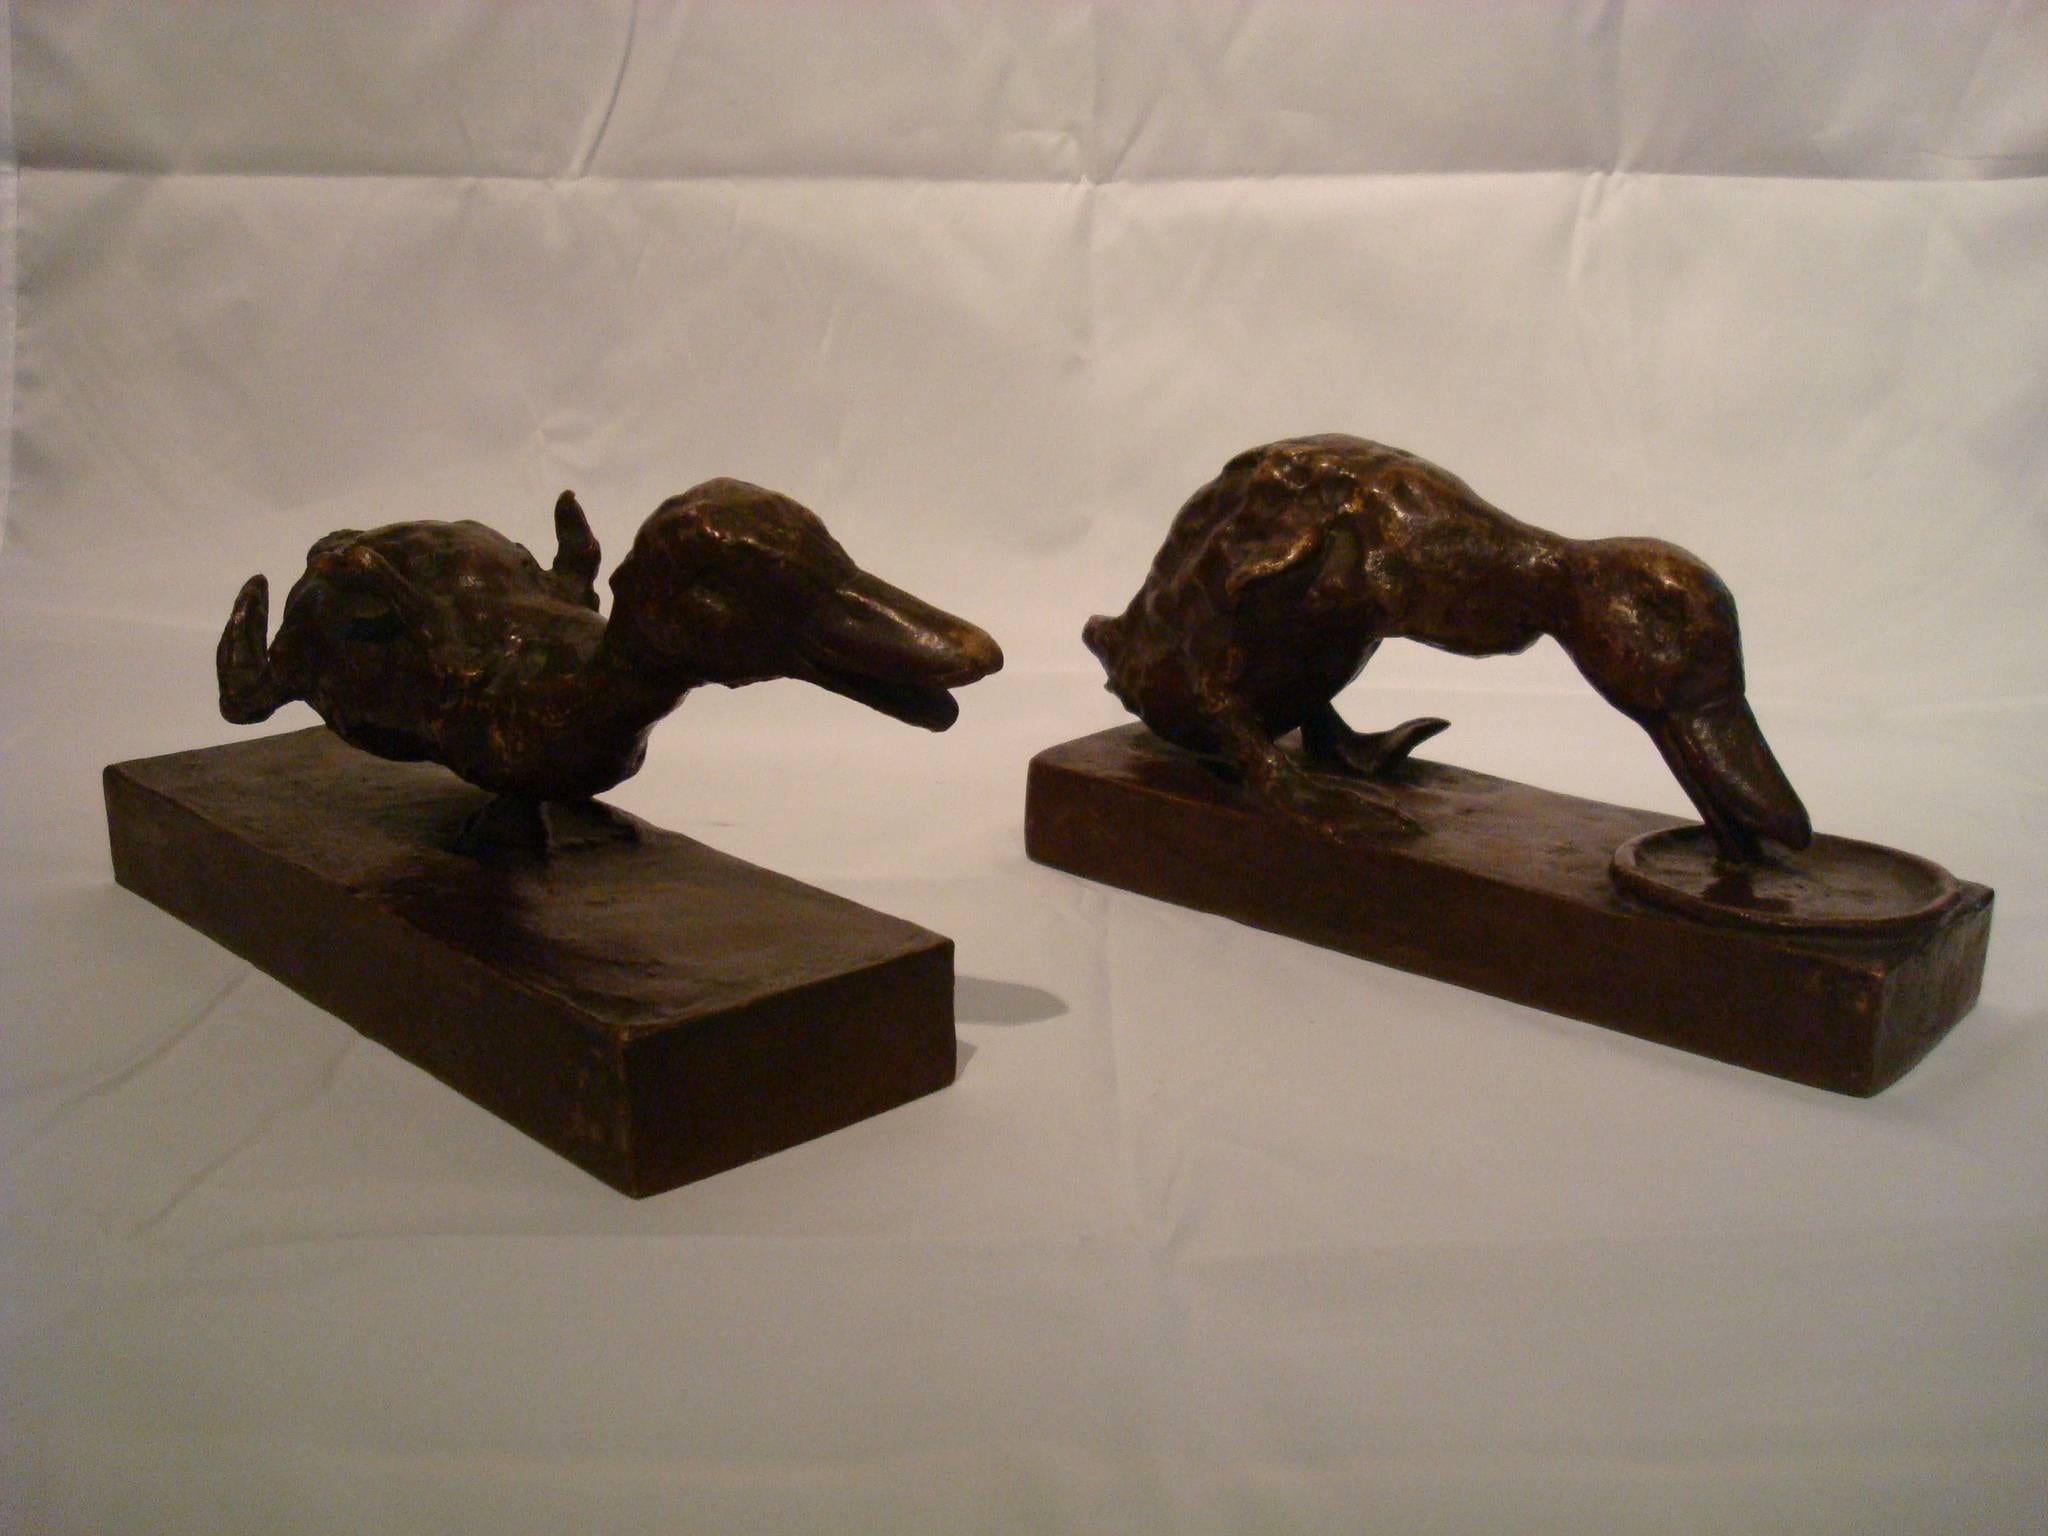 A pair of young ducks bookends (running and eating). Very rare model. Lost Wax Foundry method. Each signed "E·B· PARSONS " and stamped "Kunst Foundry NY," in the bases. Bronze with brown original patina.
Condition: Wear and